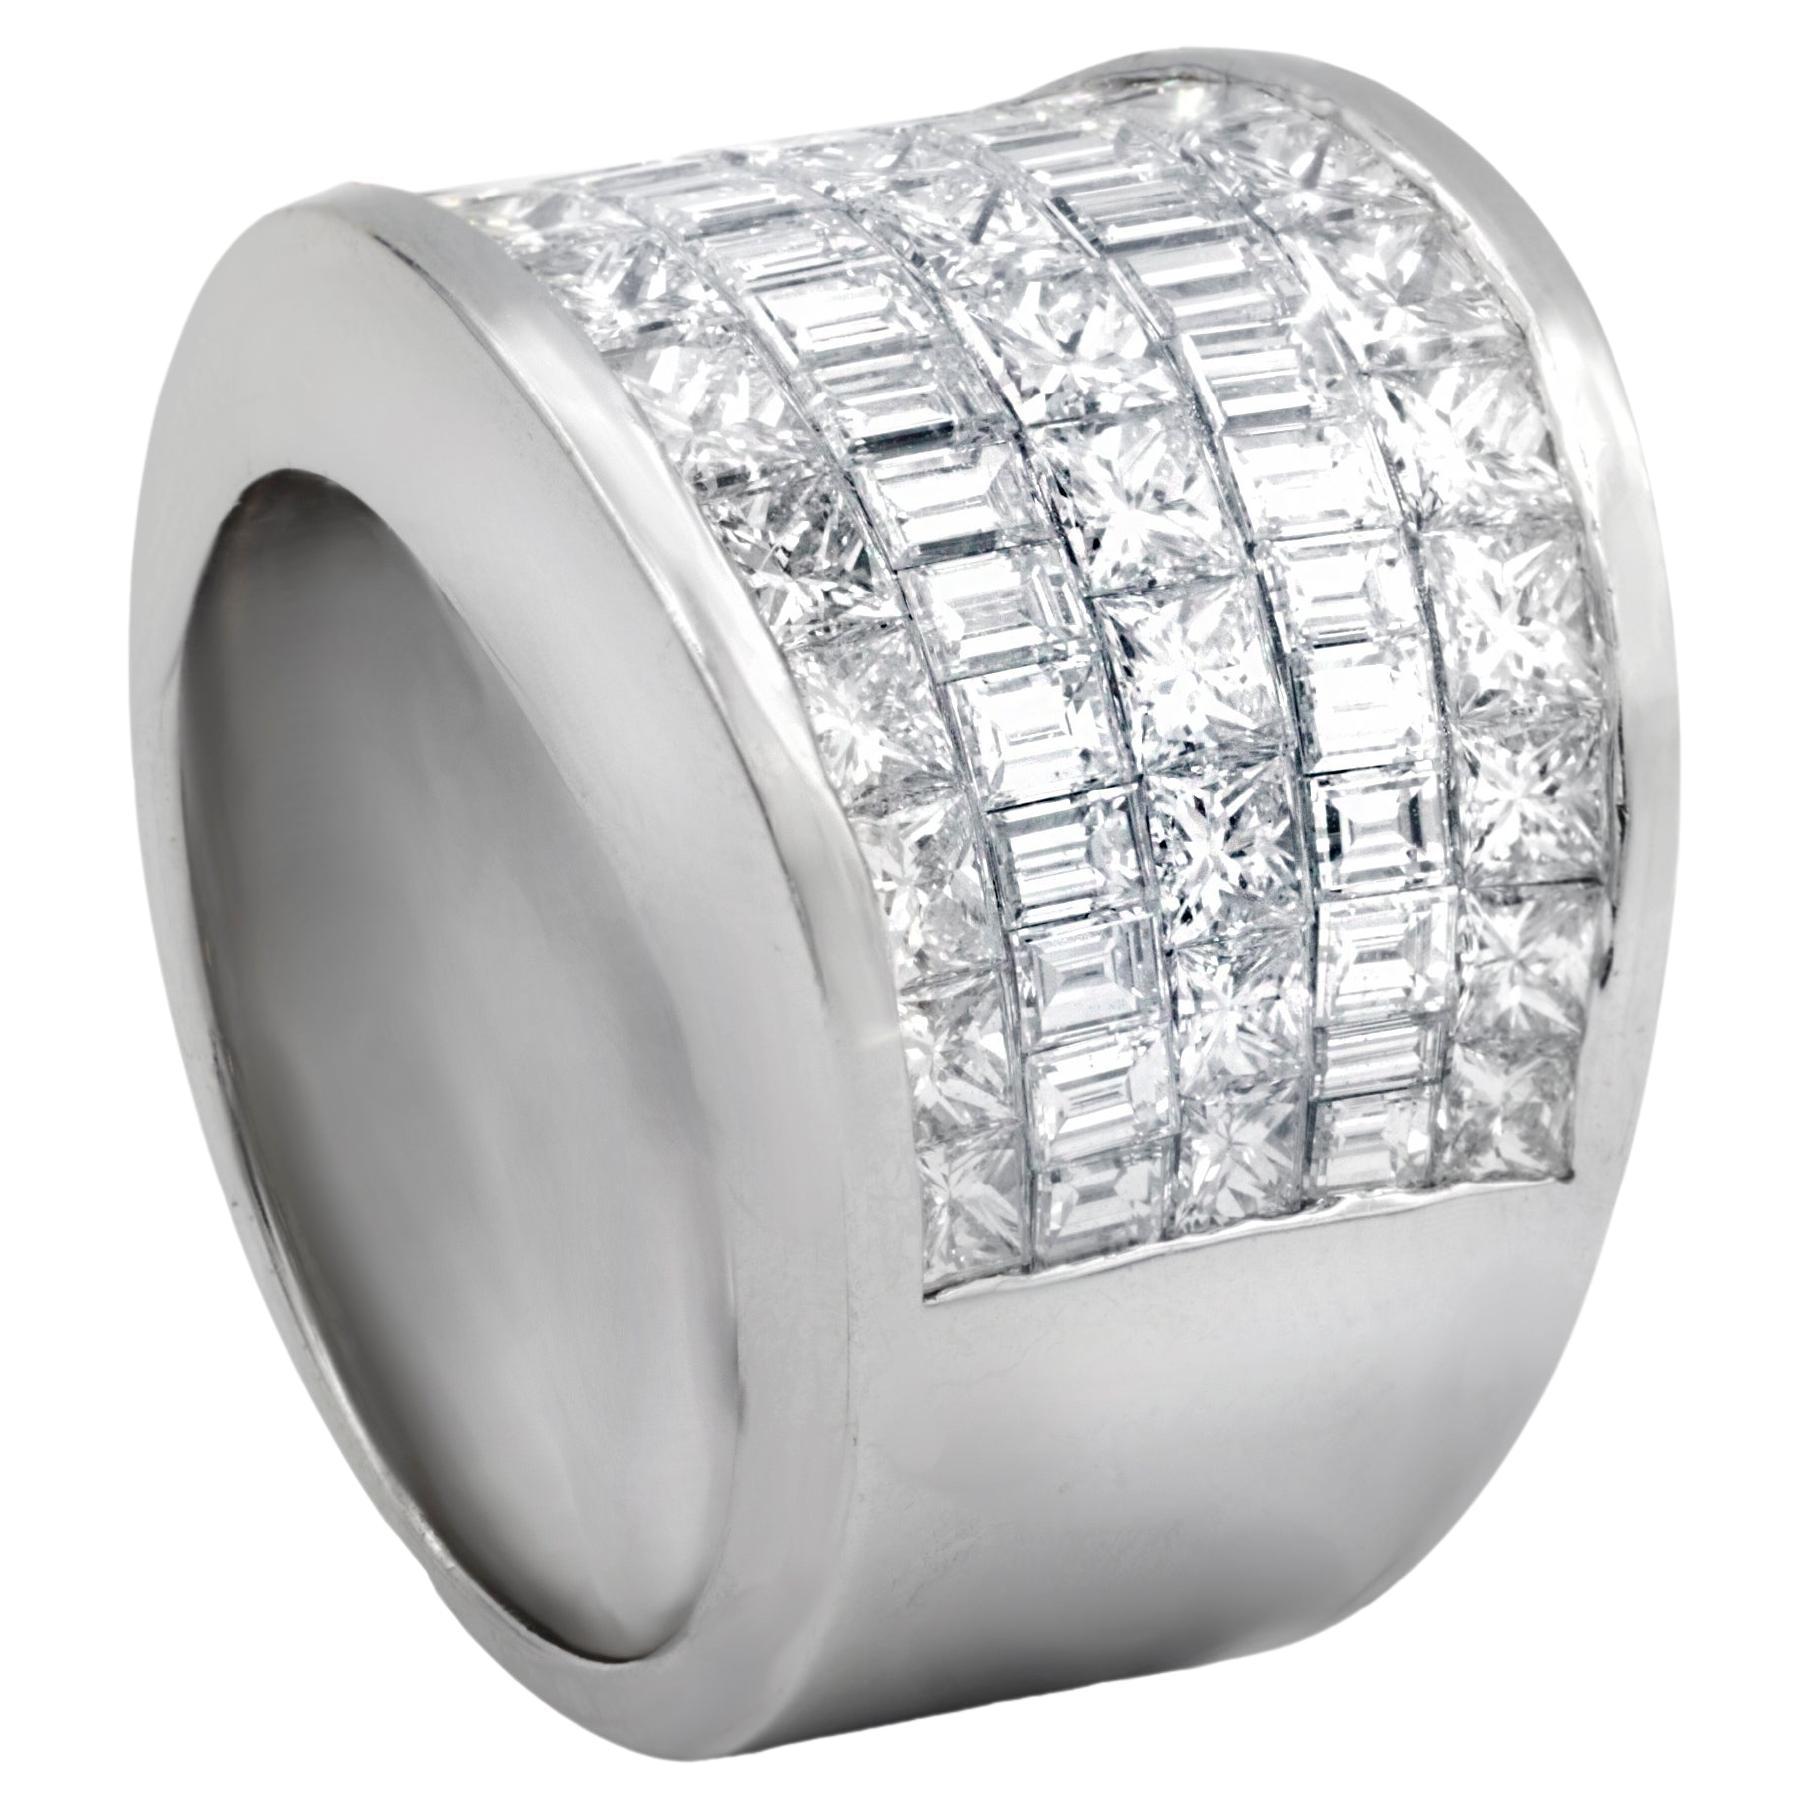 Diana M. 18 kt White Gold Diamond Ring Containing Alternating Rows 